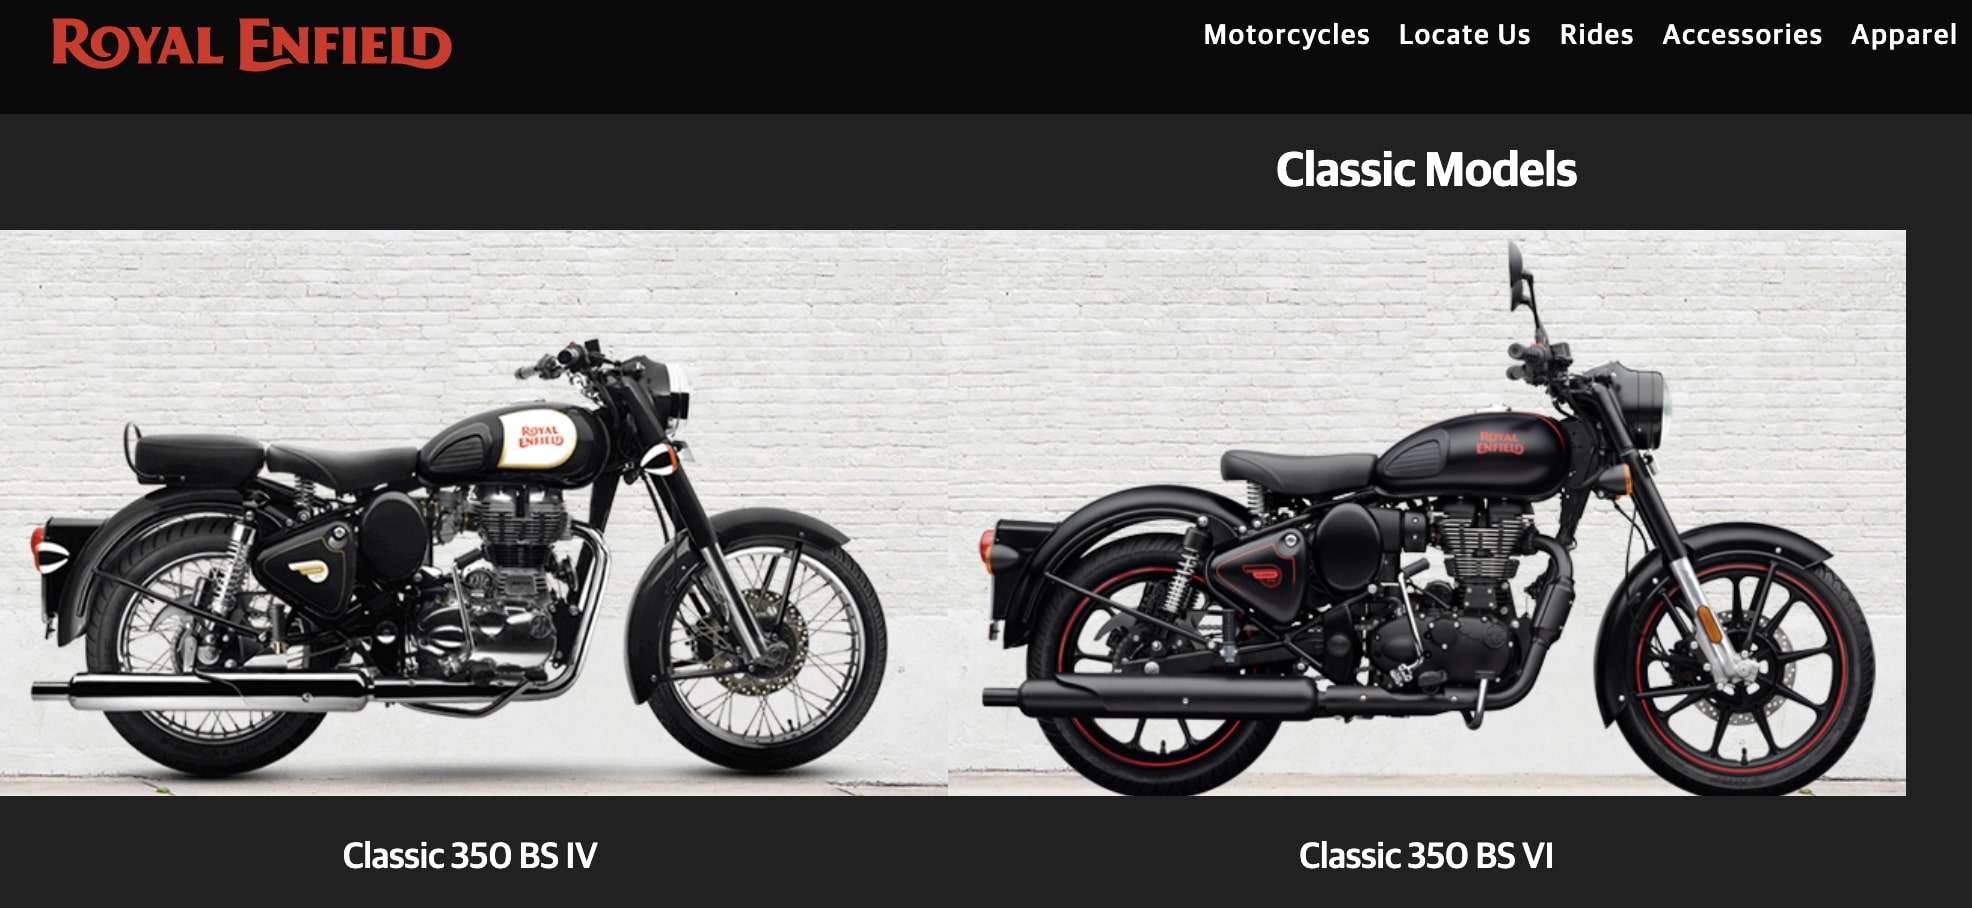 500cc Royal Enfield Classic Series Discontinued